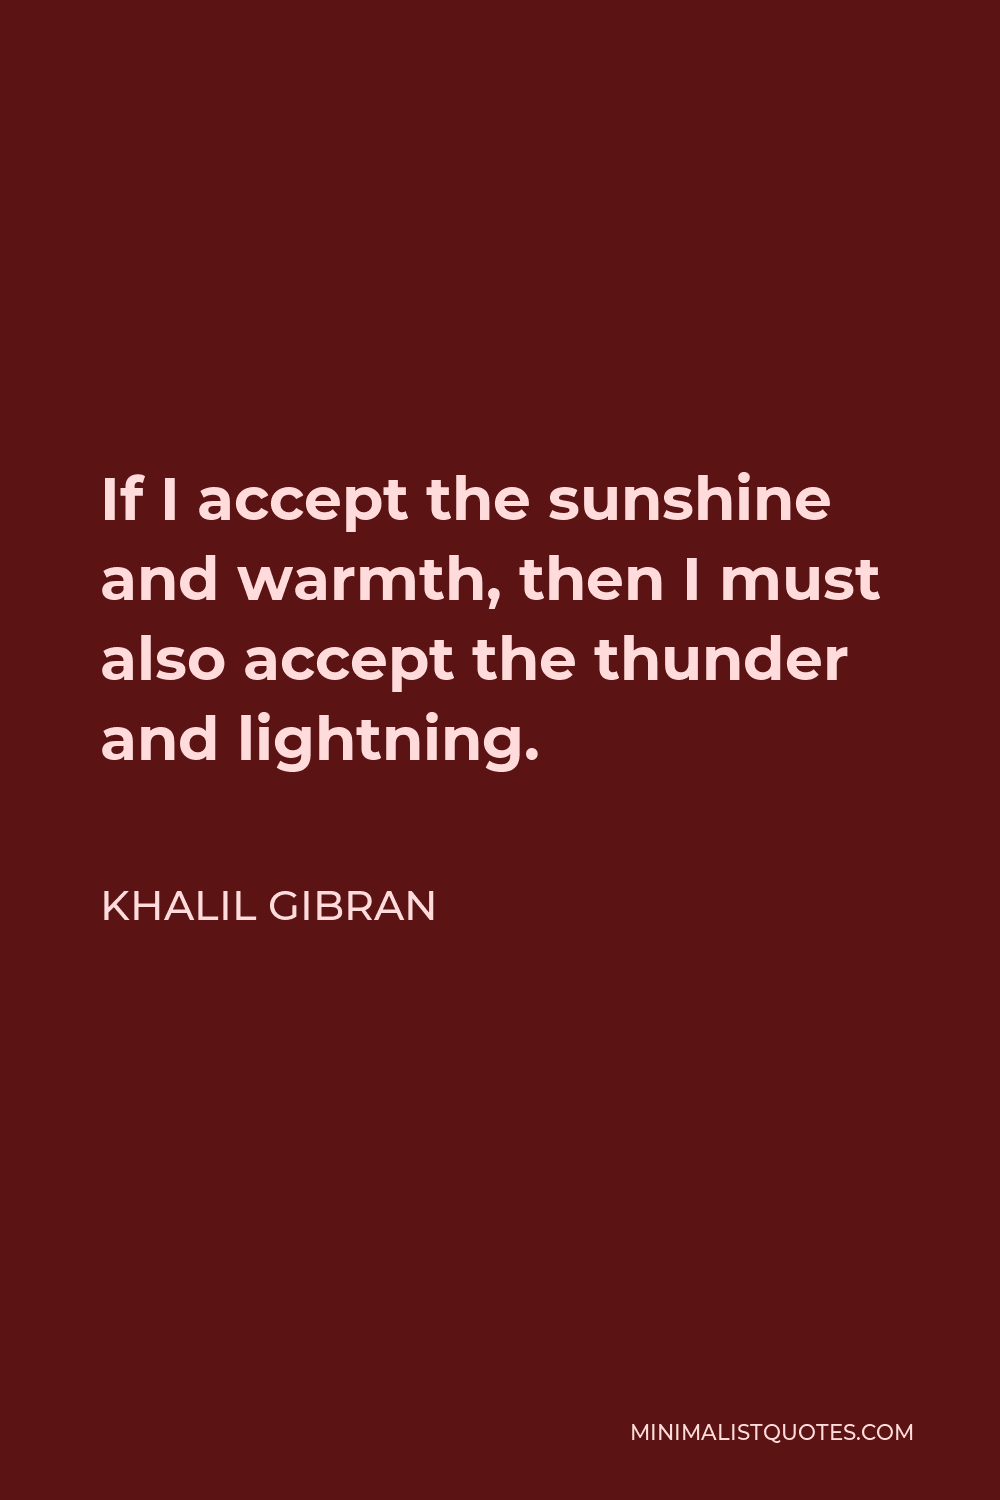 Khalil Gibran Quote - If I accept the sunshine and warmth, then I must also accept the thunder and lightning.